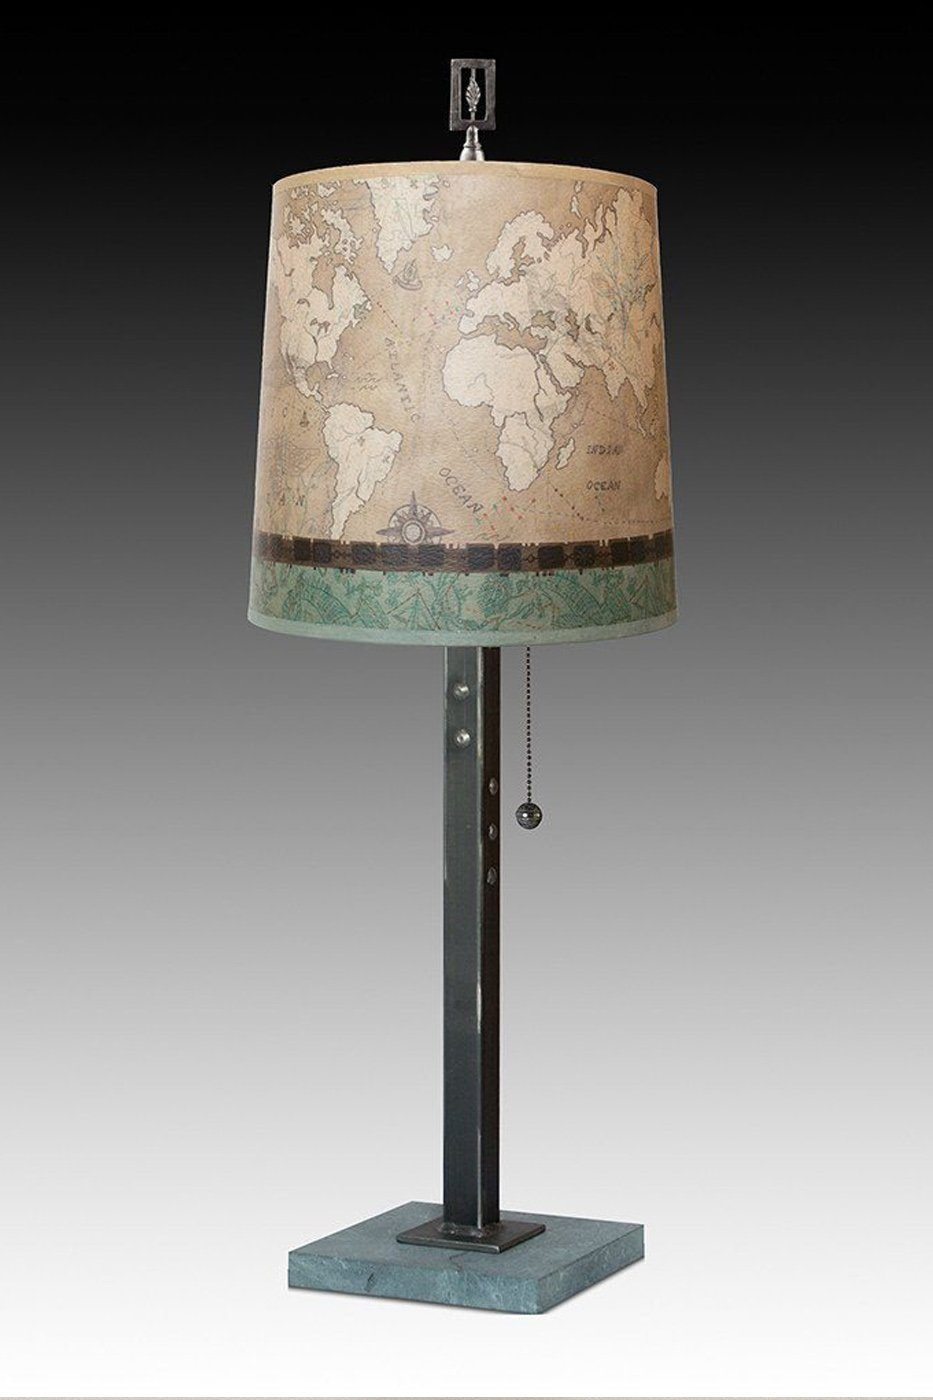 Steel Table Lamp with Medium Drum Shade in Voyages